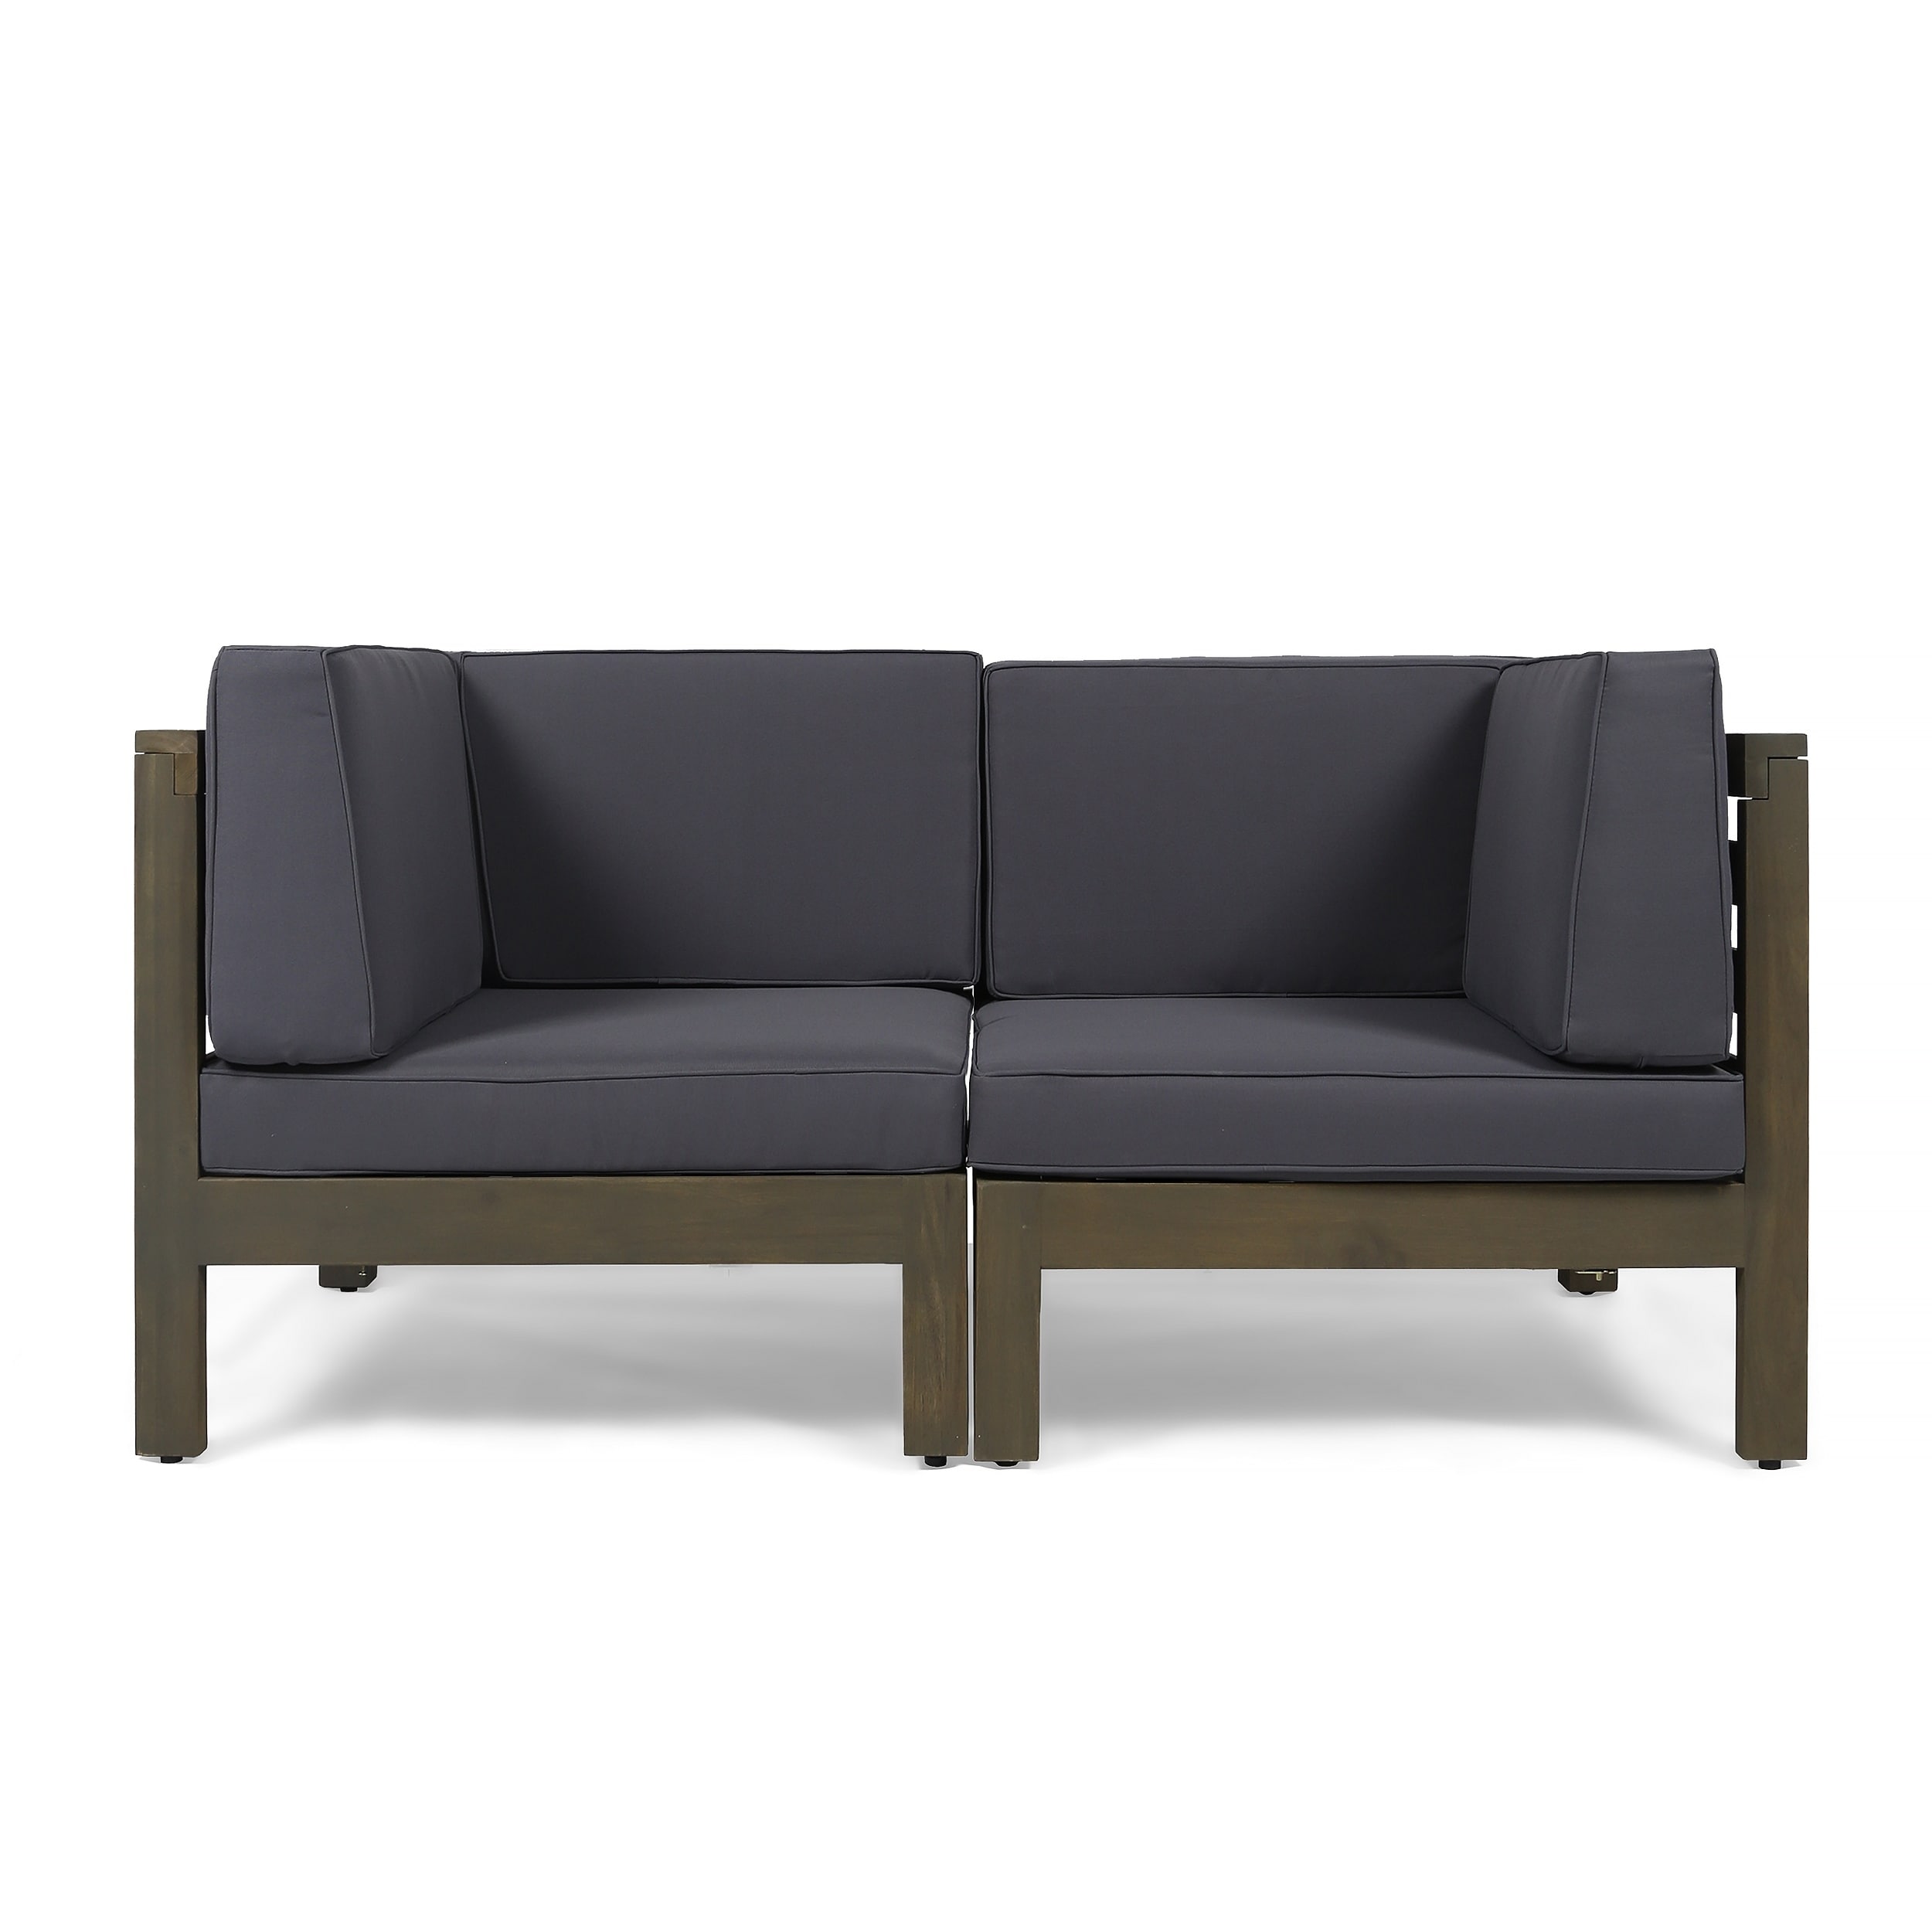 Oana Outdoor 2-seater Sectional Acacia Loveseat By Christopher Knight Home